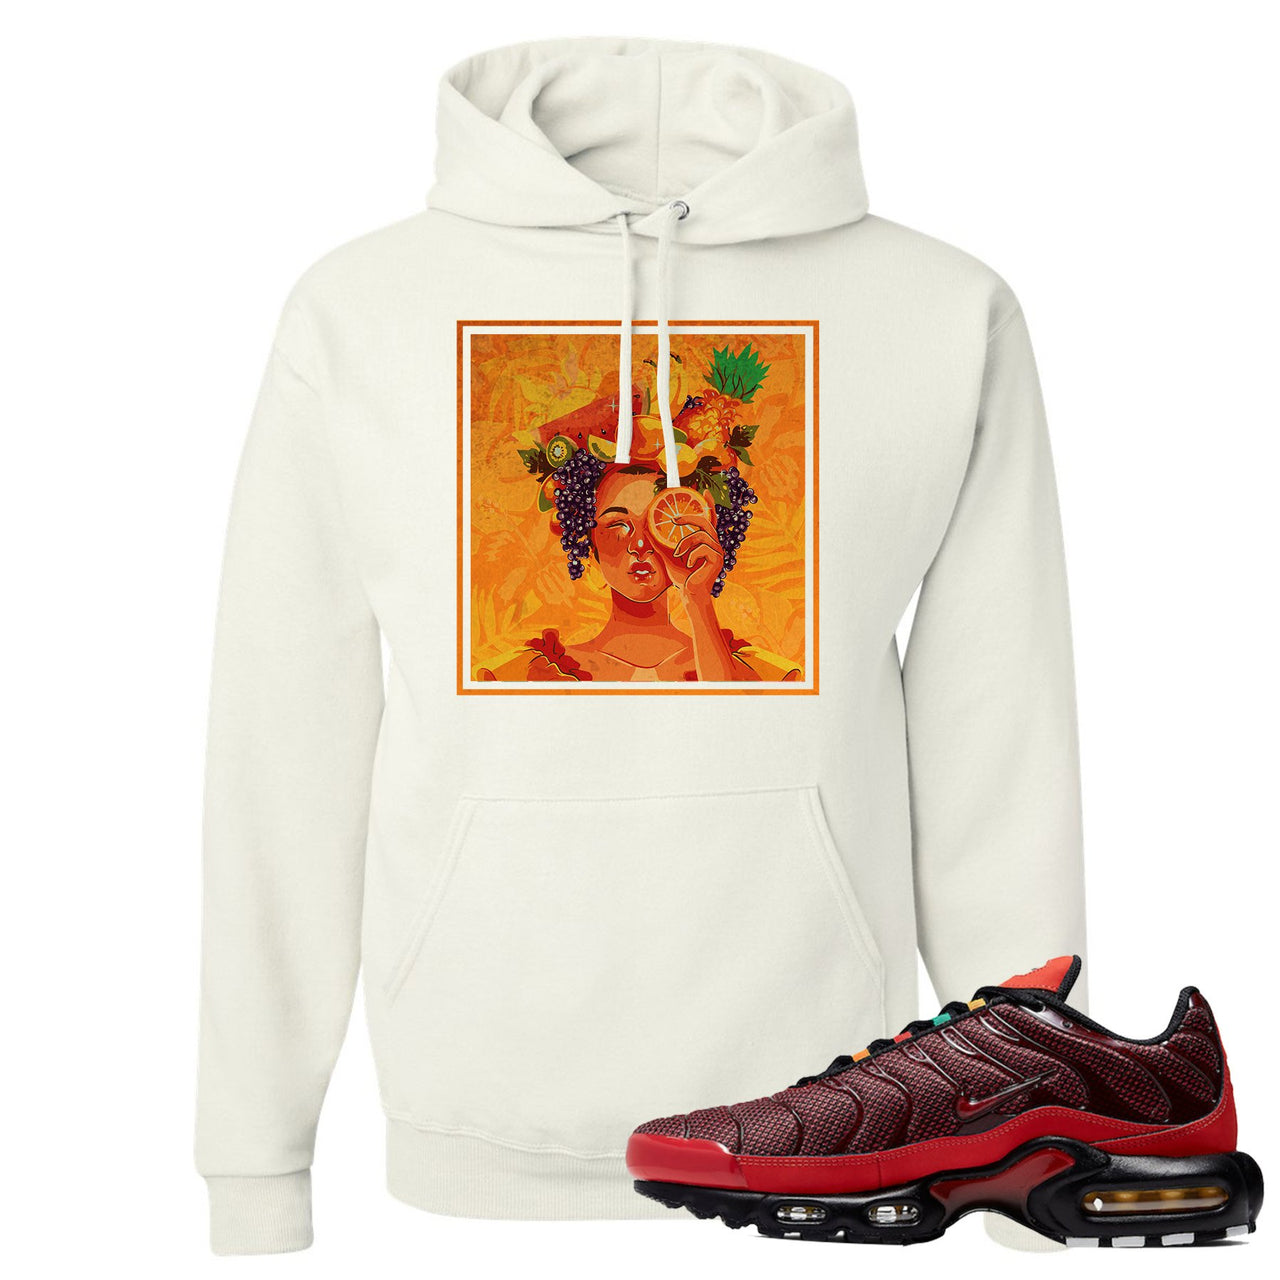 printed on the front of the air max plus sunburst sneaker matching white pullover hoodie is the lady fruit log